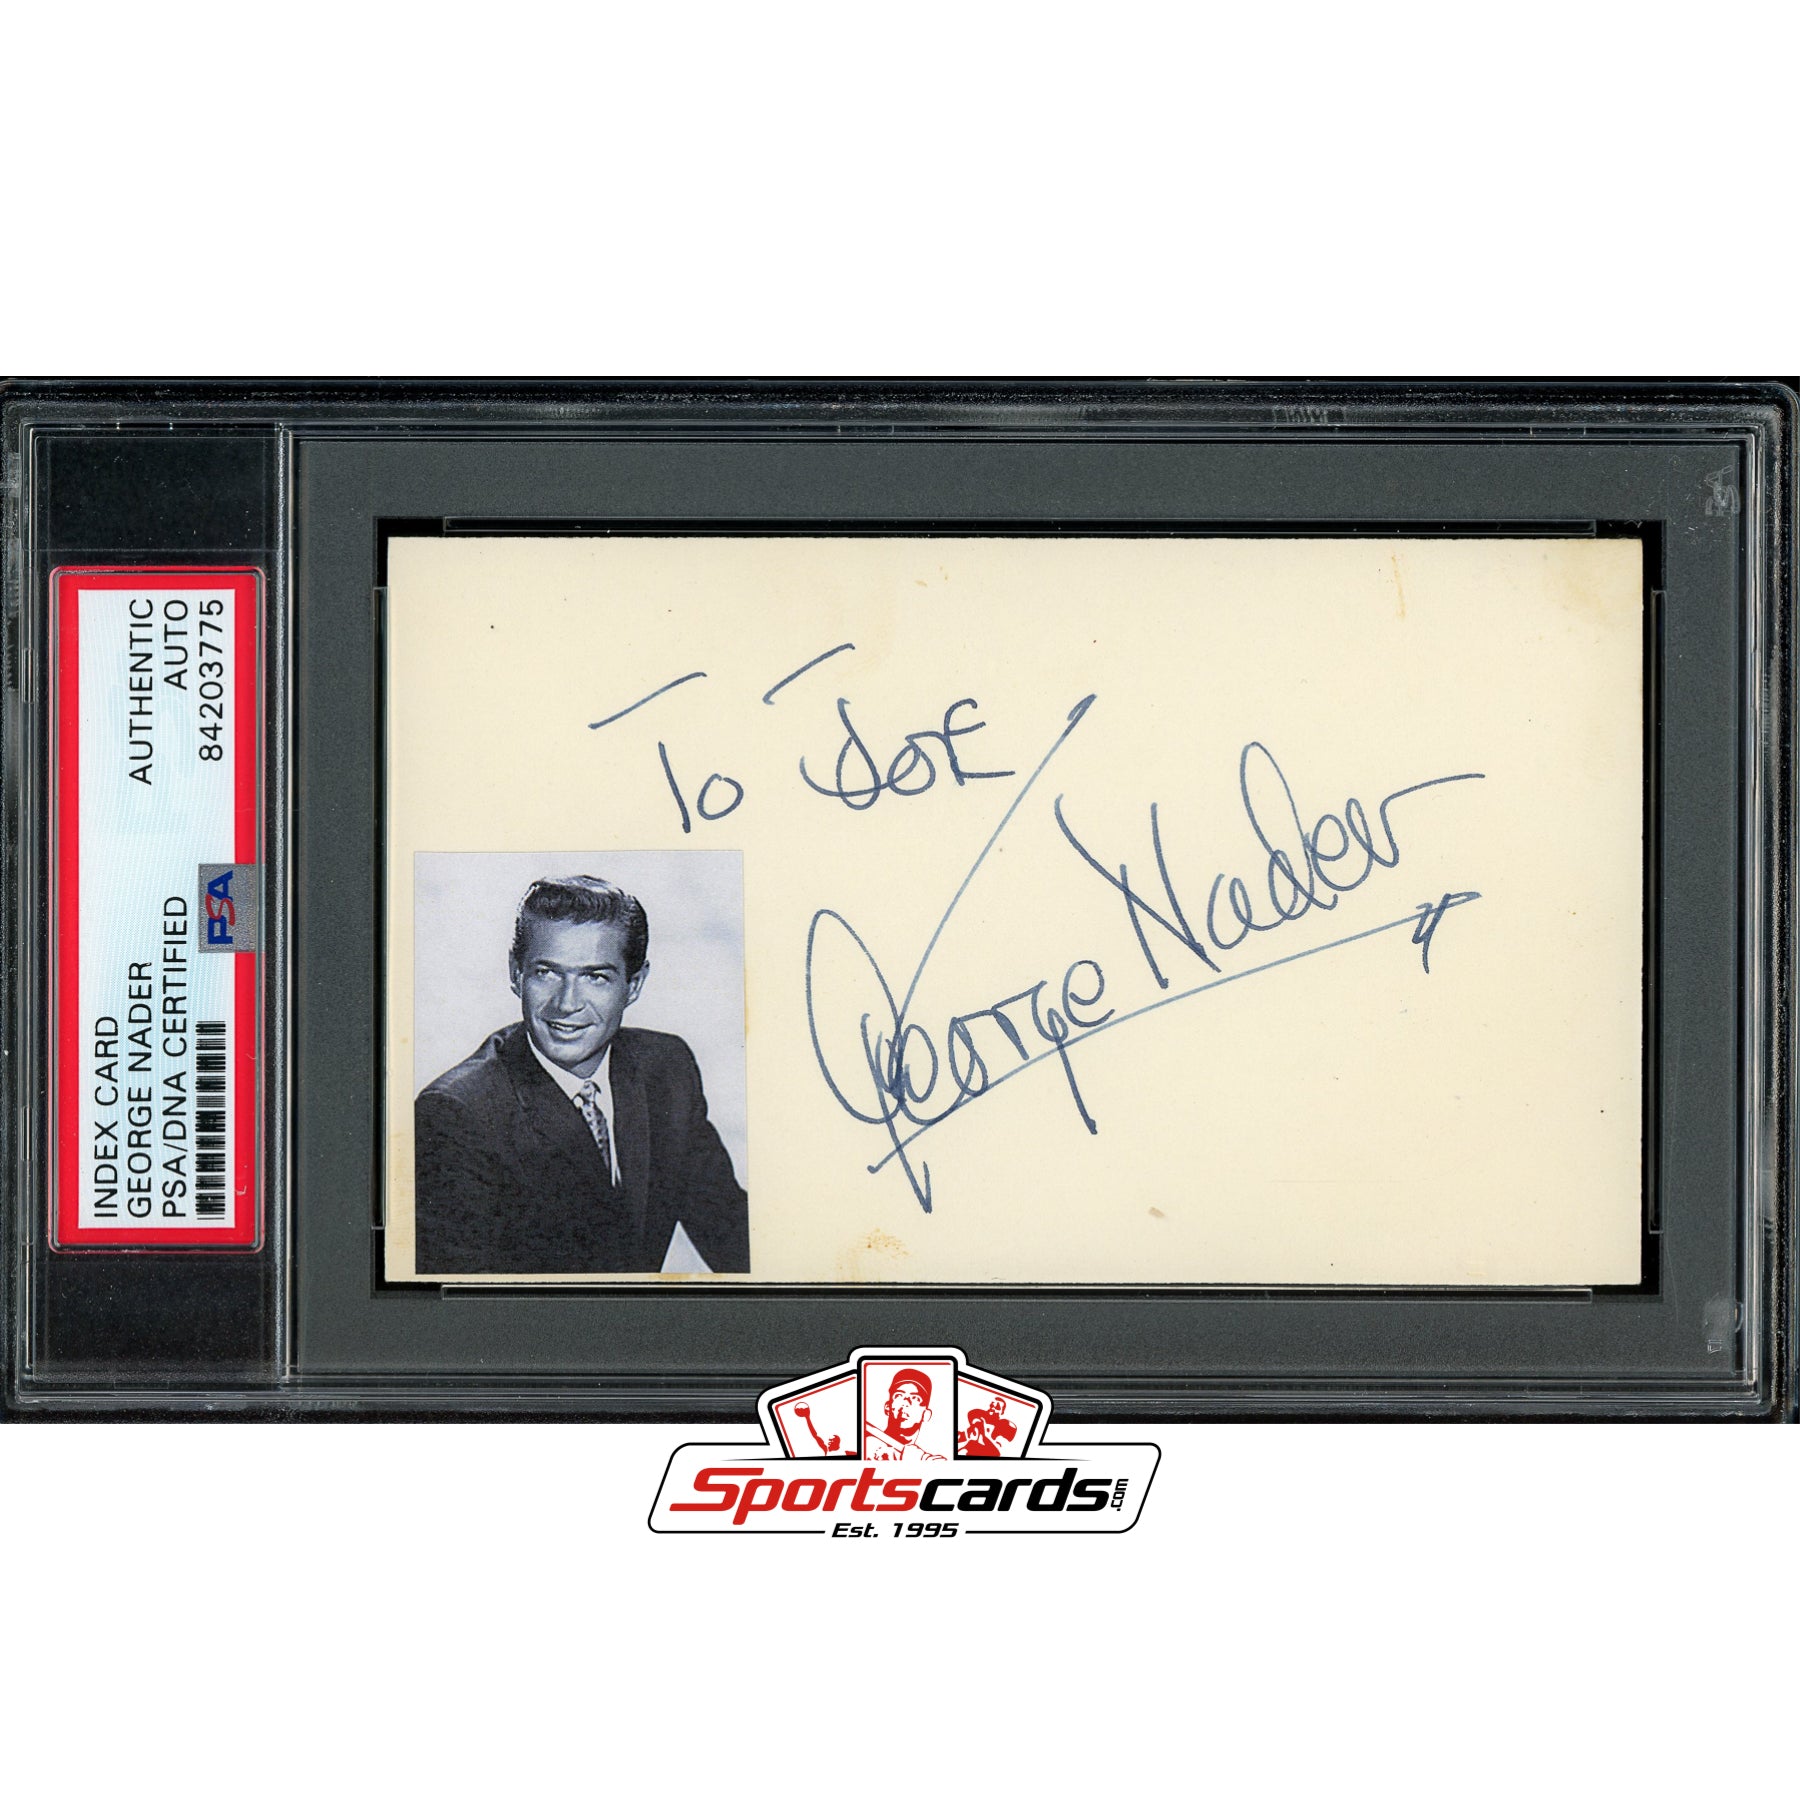 George Nader (d.2002) Signed Auto 3x5 Index Card PSA/DNA Actor